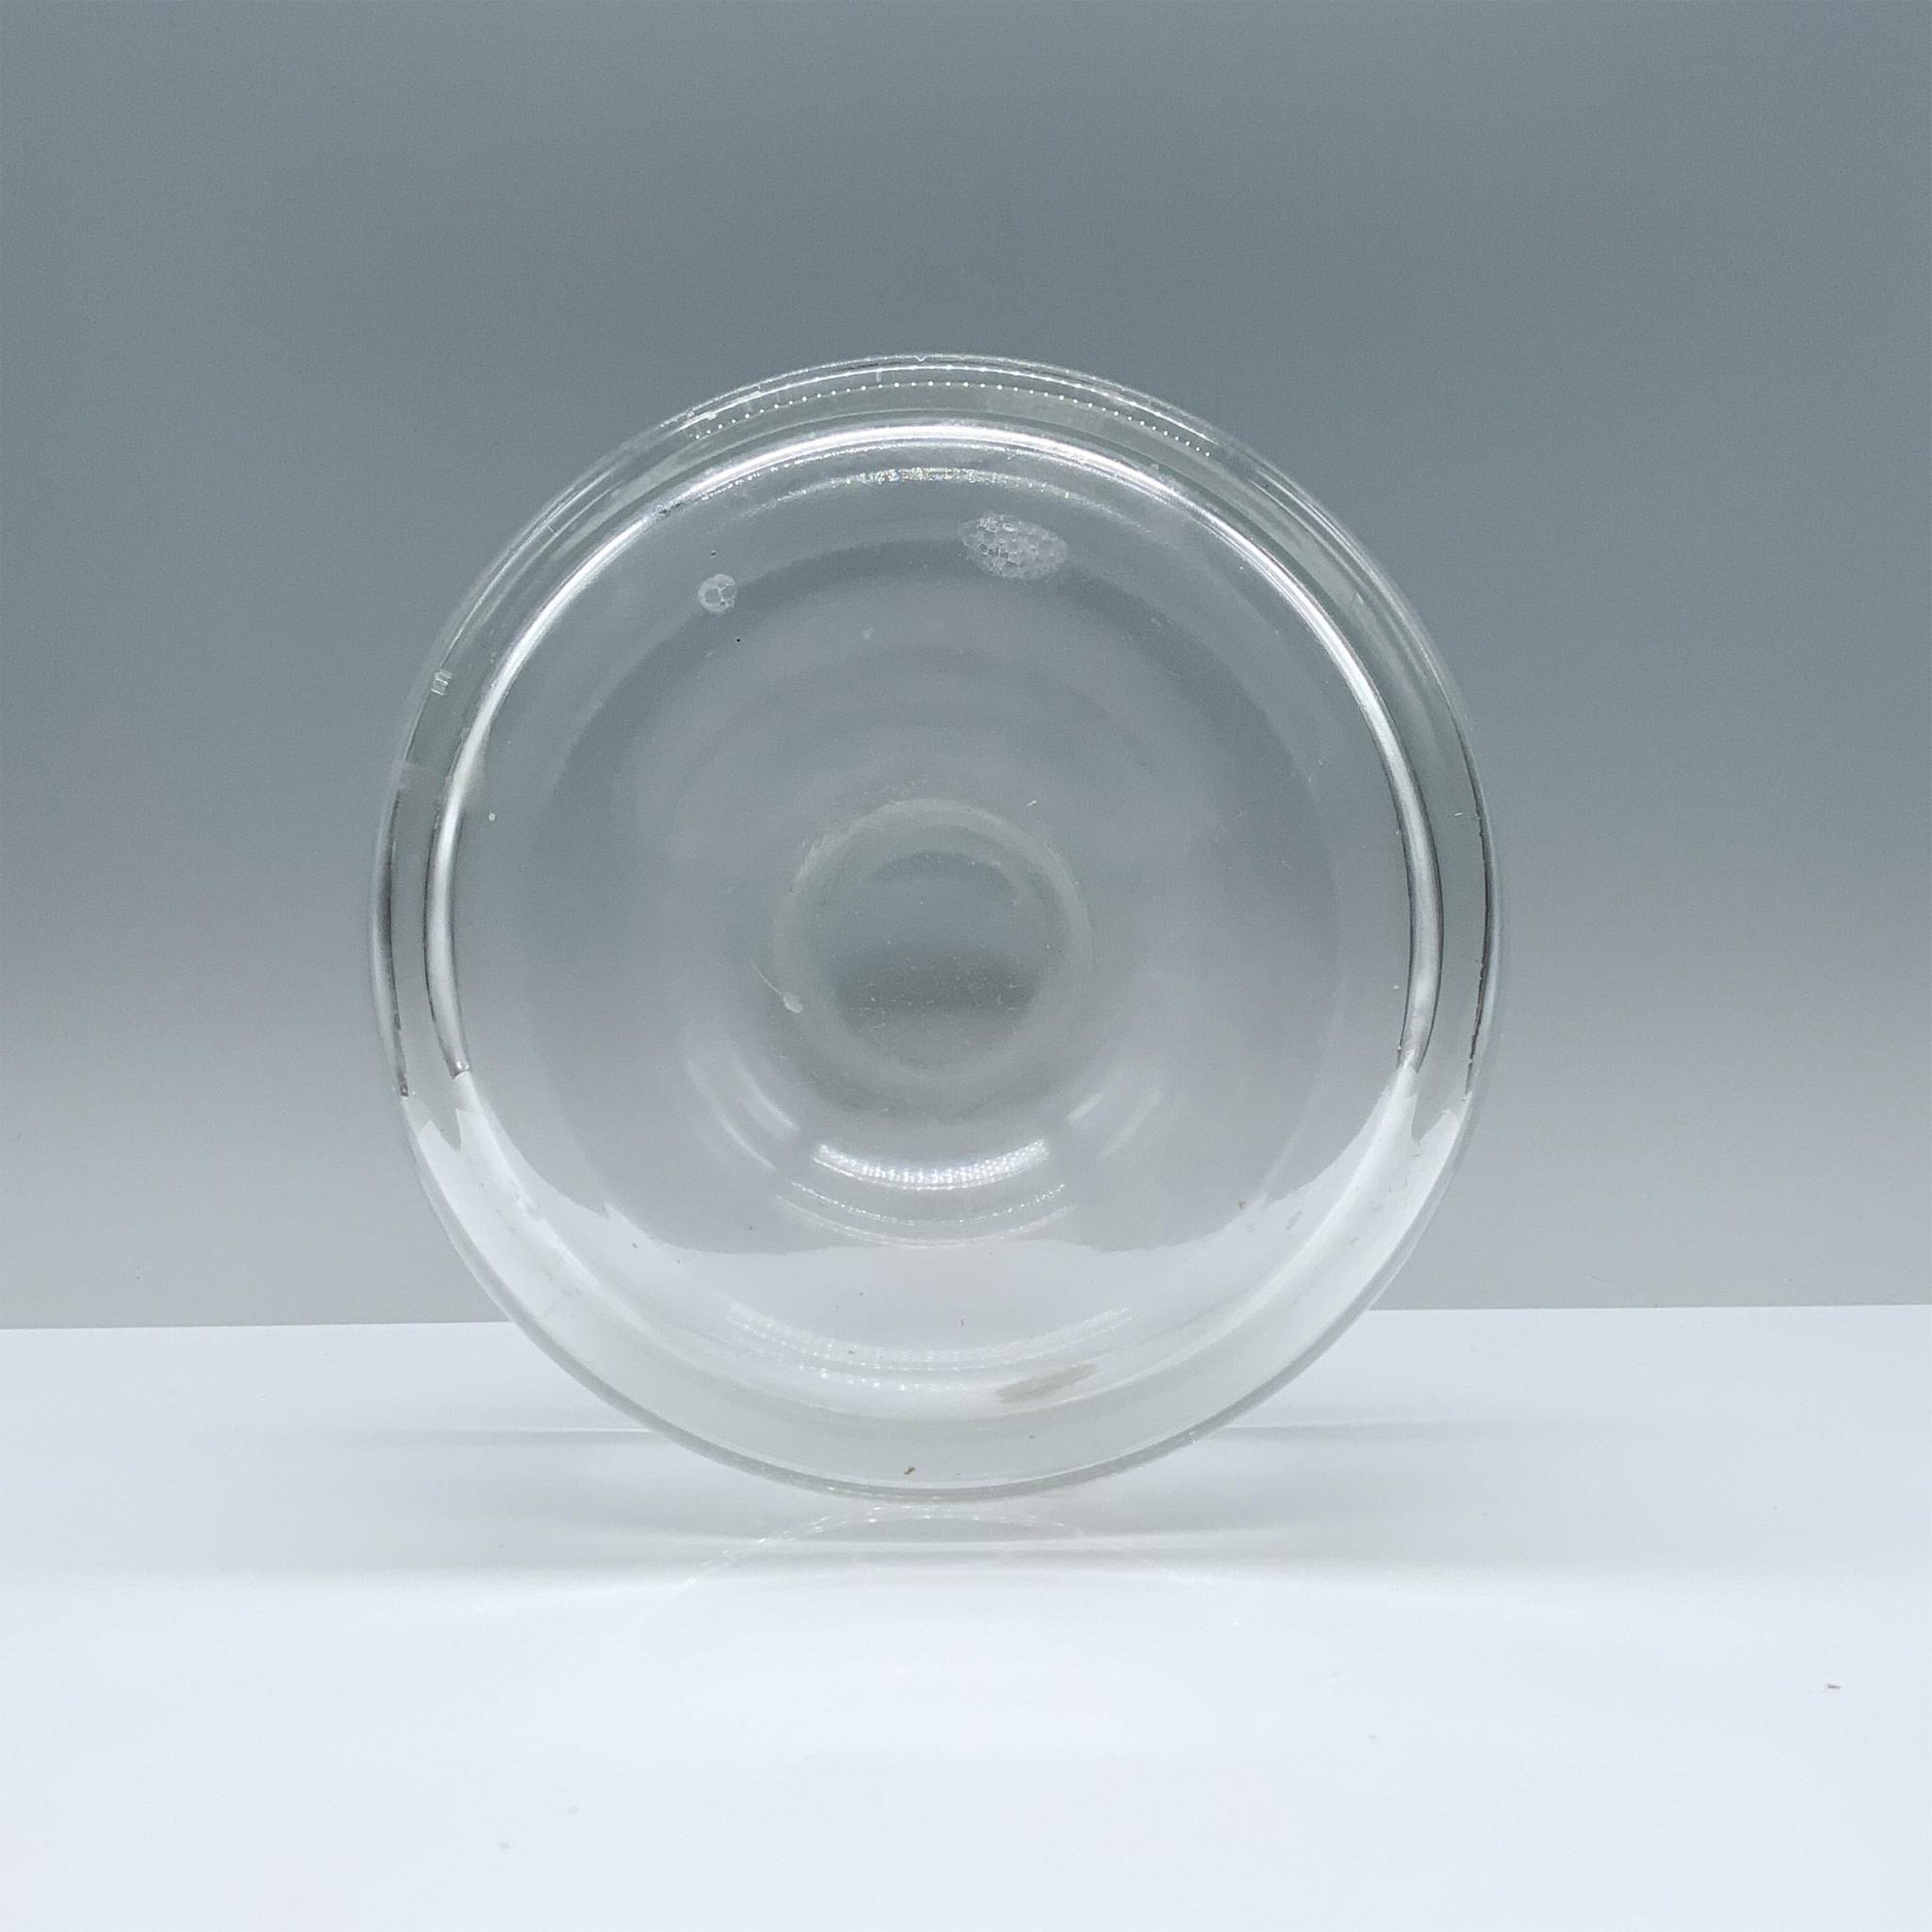 Svend Jensen Crystal Decanter and Stopper - Image 3 of 3